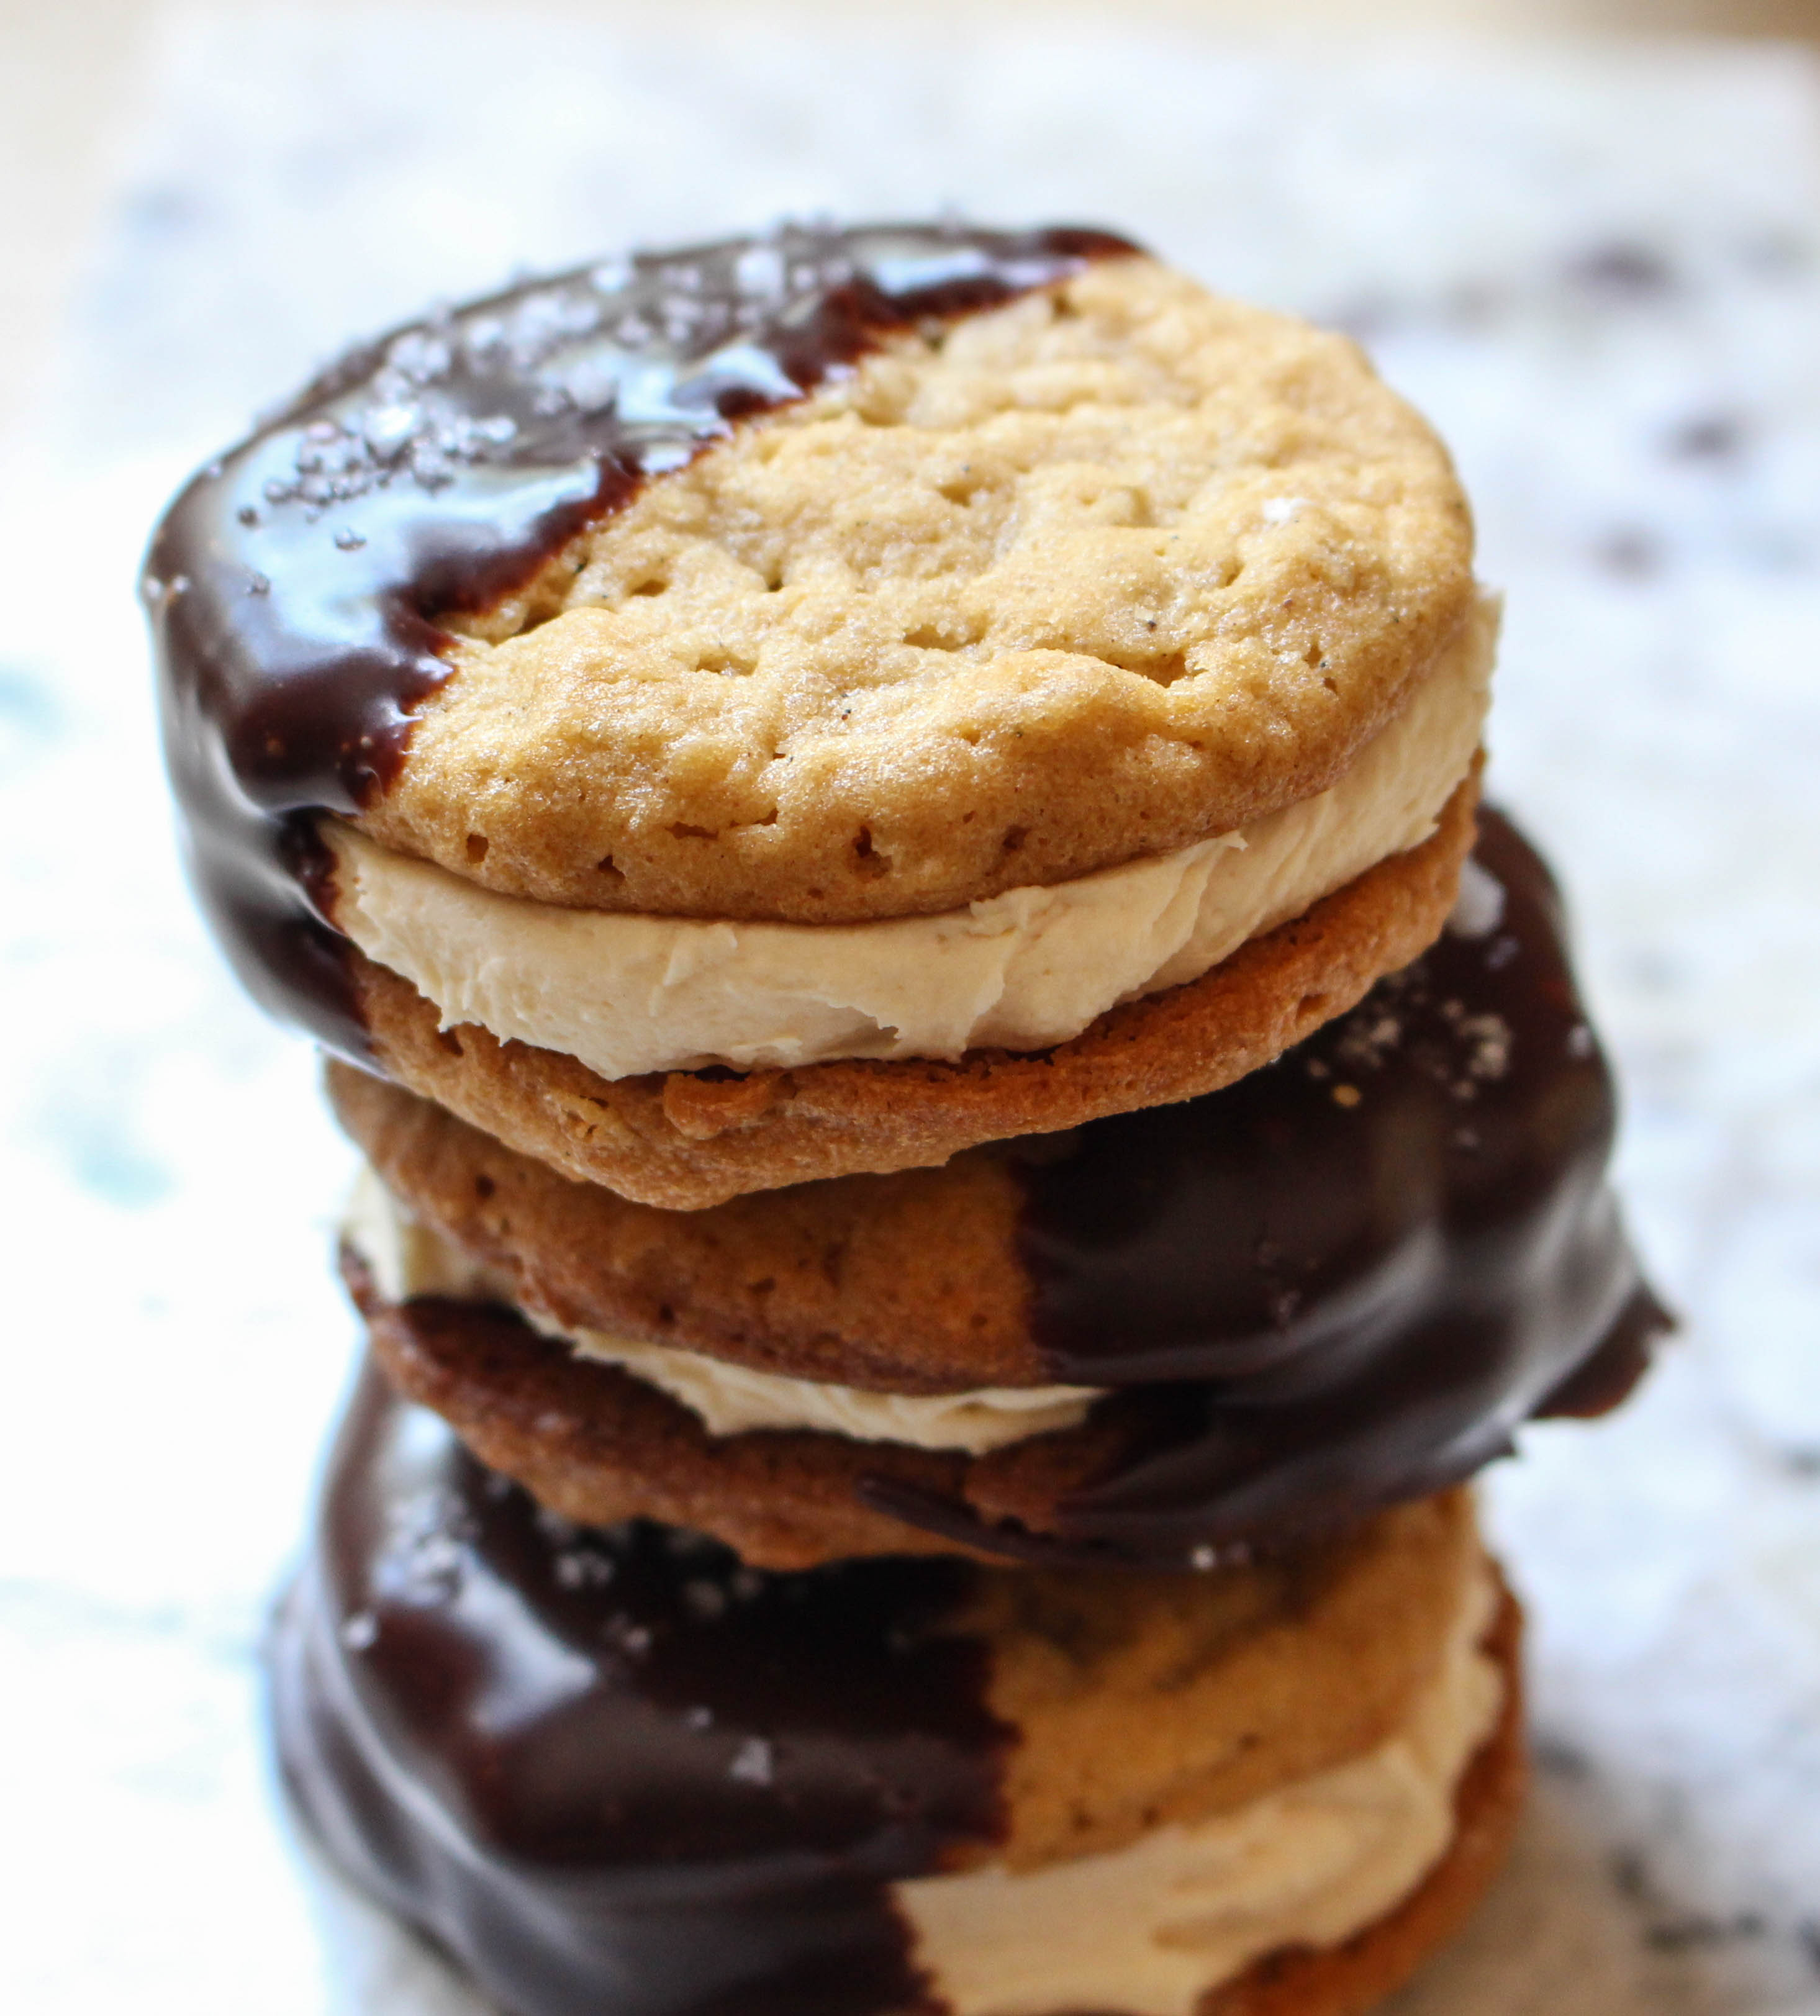 Chocolate-Dipped Peanut Butter Cookie Sandwiches with Salted Caramel Filling